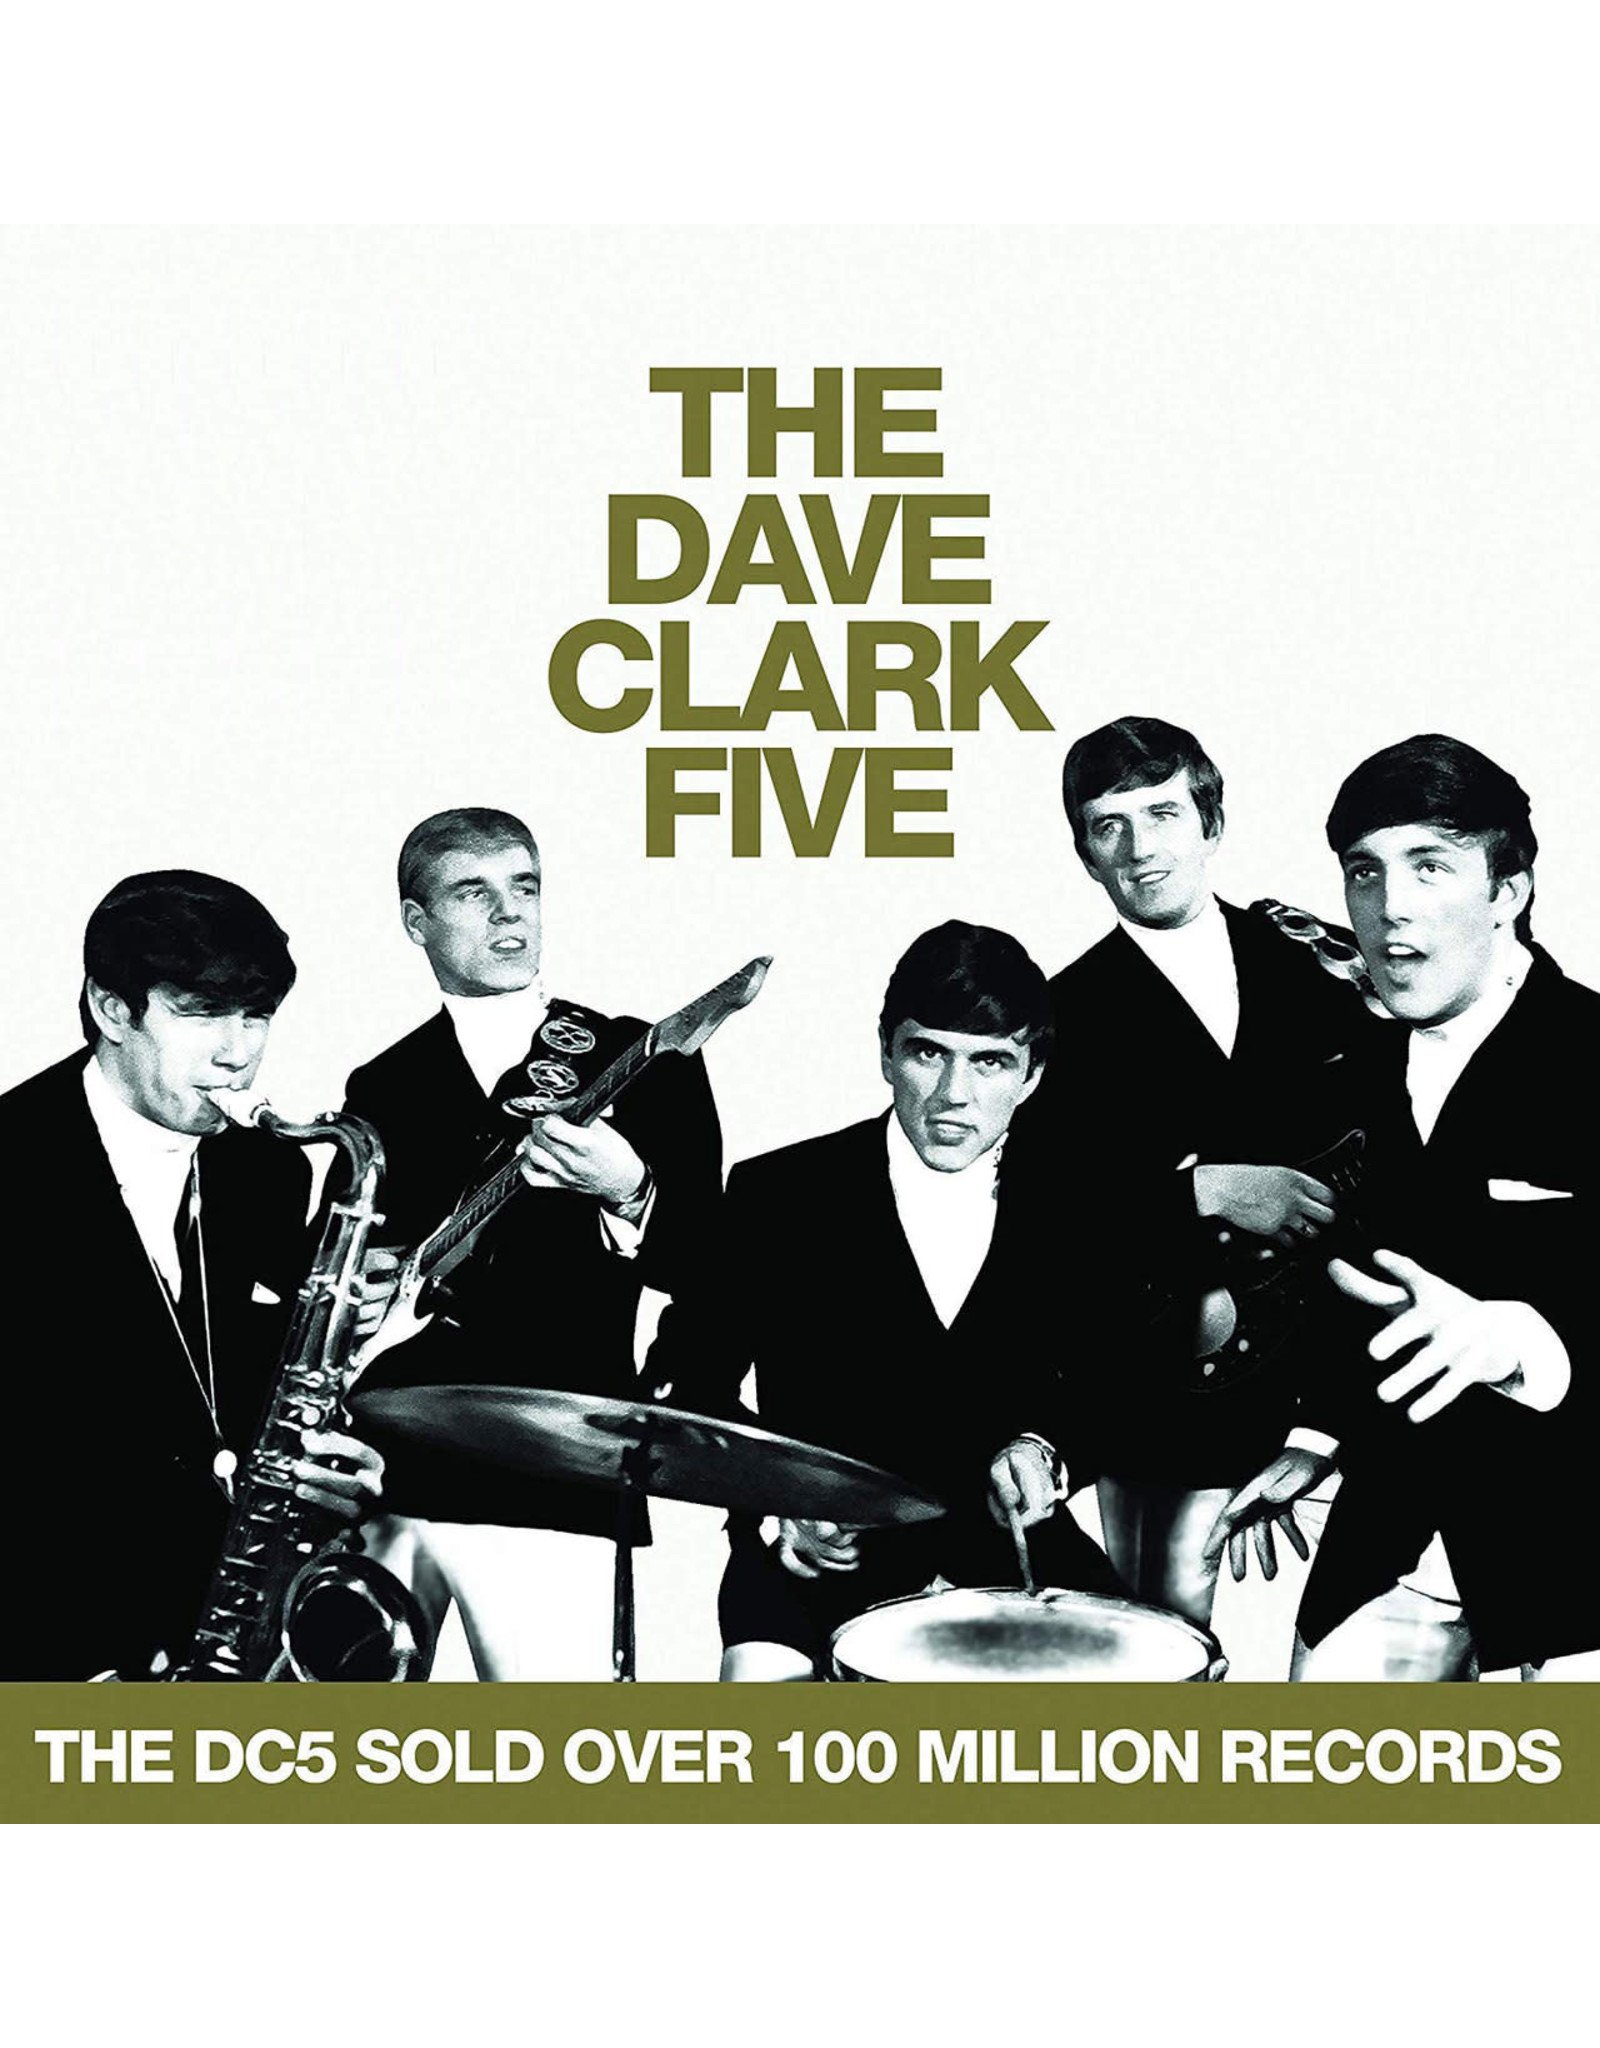 Dave Clark Five - All The Hits